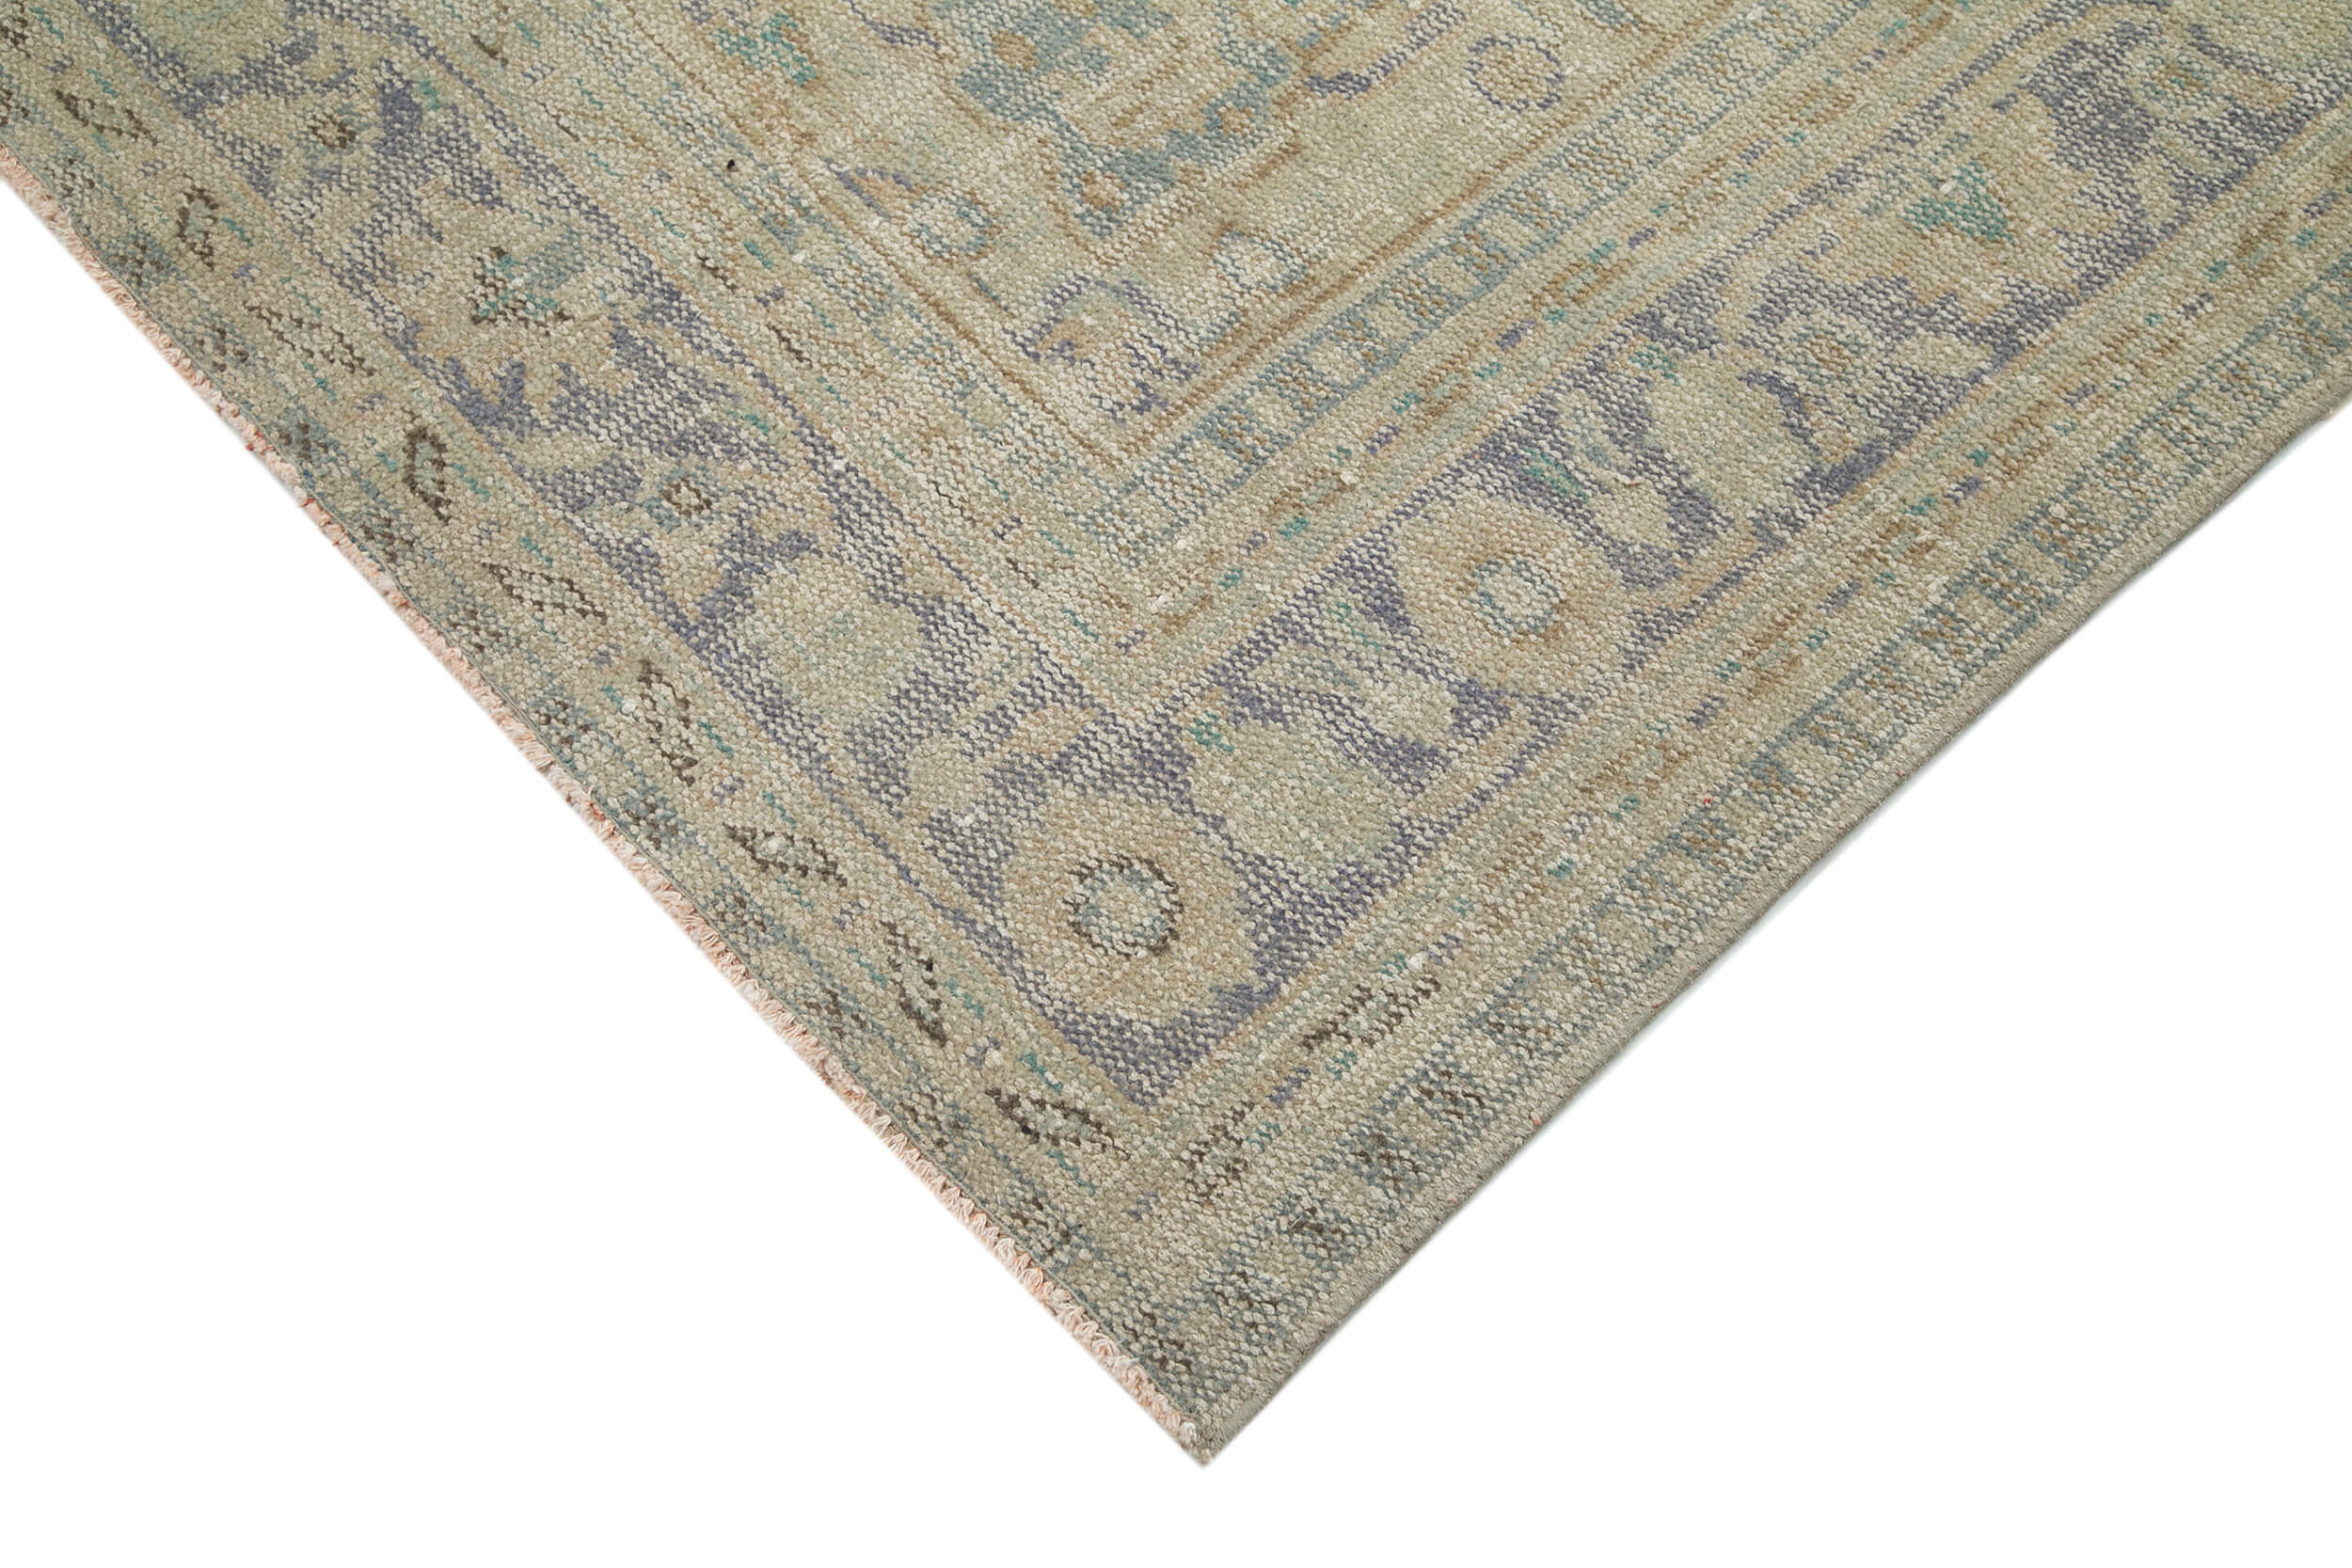 7x10 Beige Turkish Over dyed Large Area Rug -12444